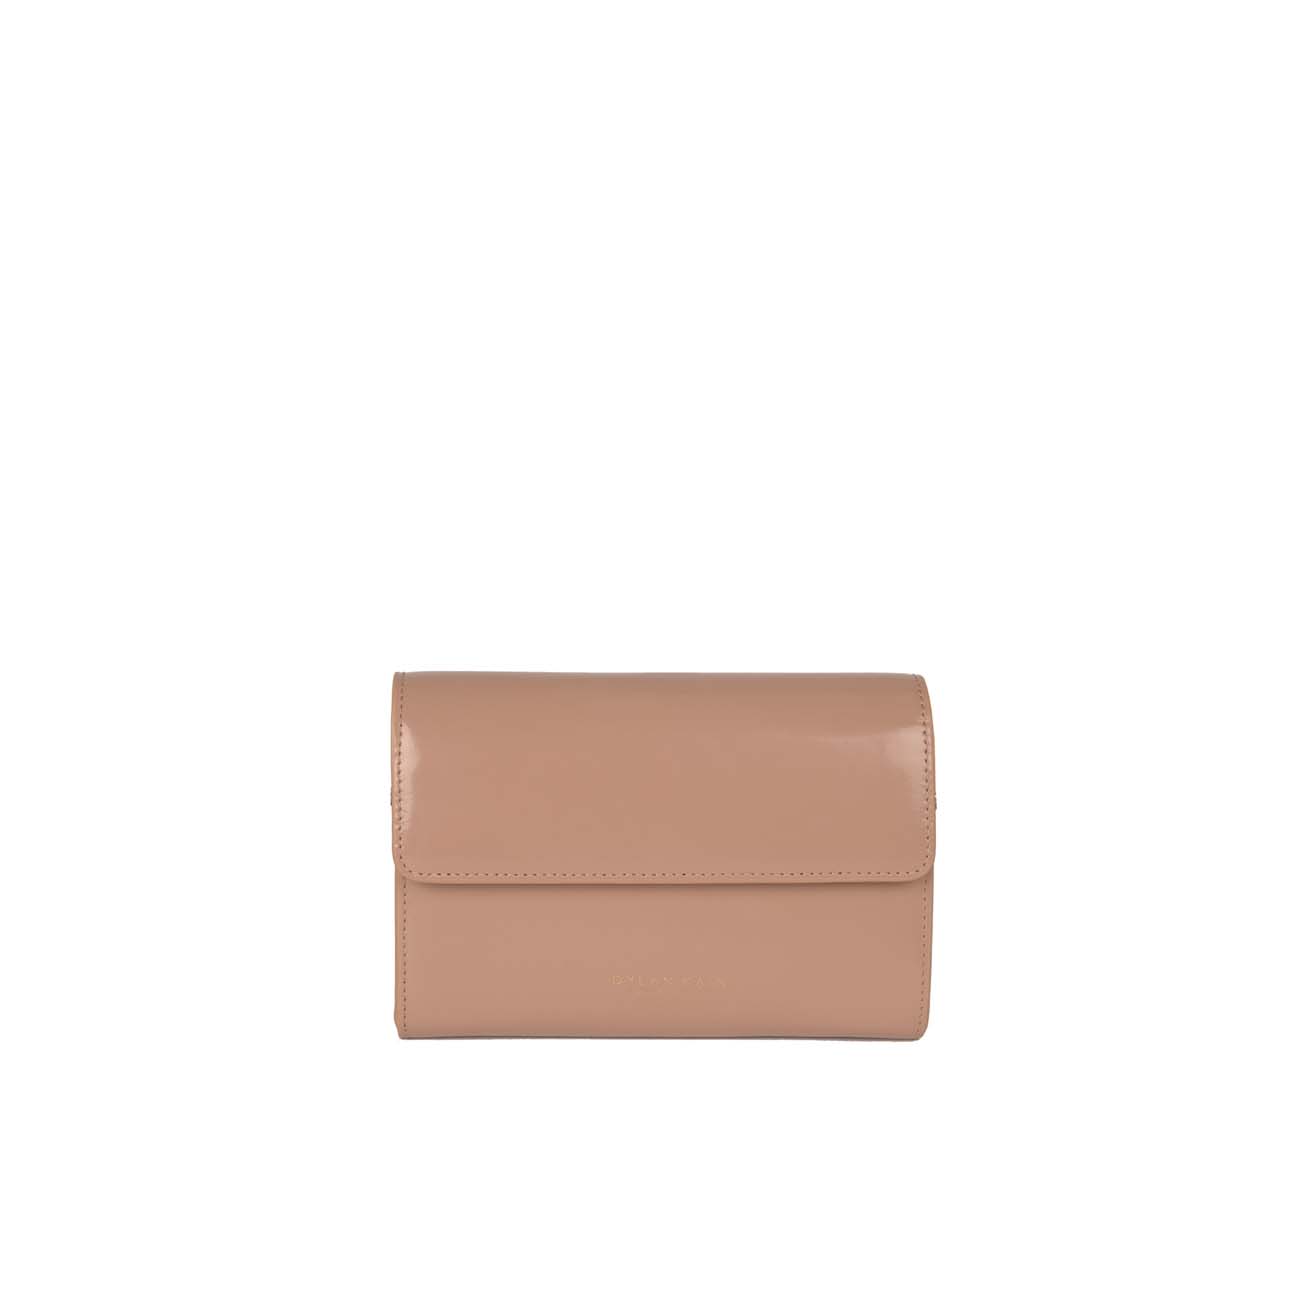 The Juicy Patent Phone Wallet Fawn - Gift Edit